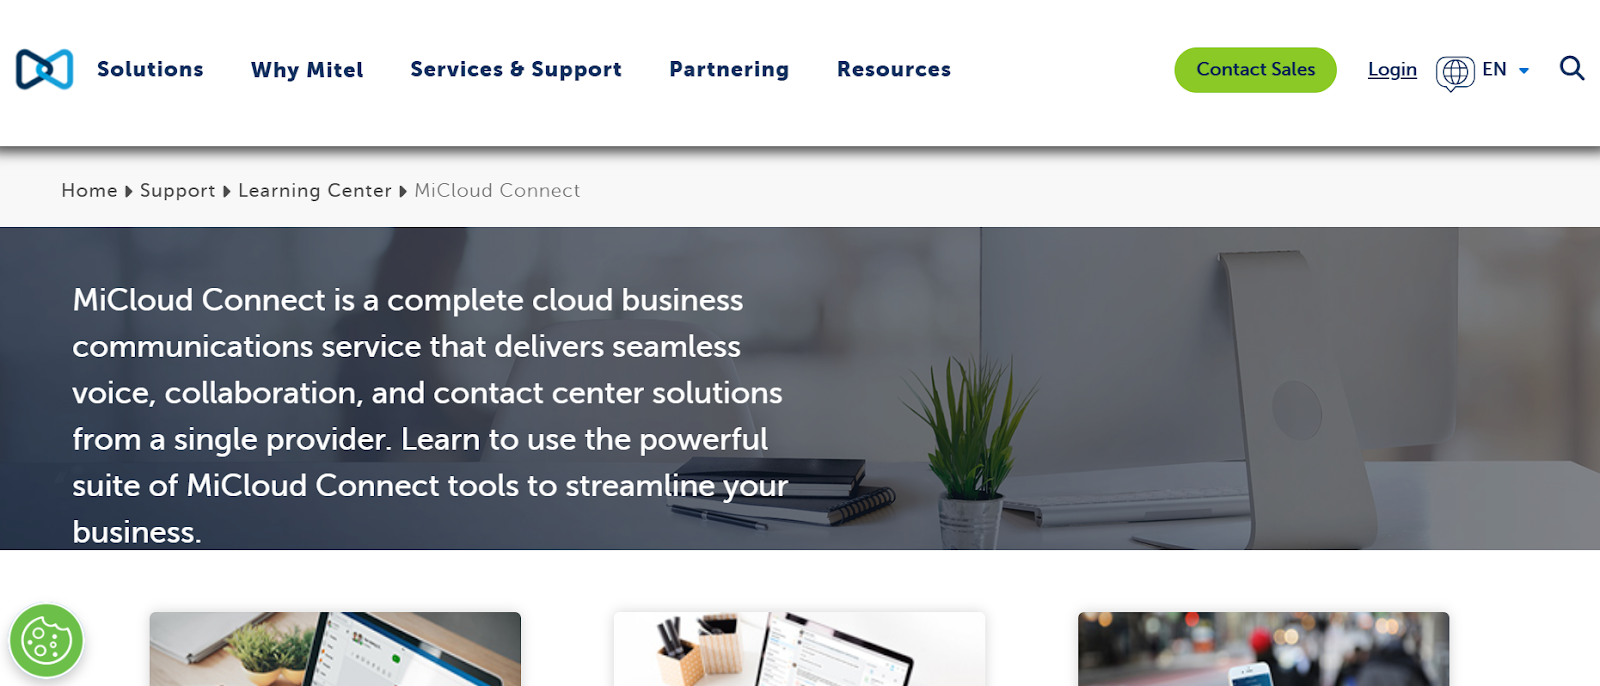 Mitel MiCloud Connect website snapshot highlighting the services it offers.